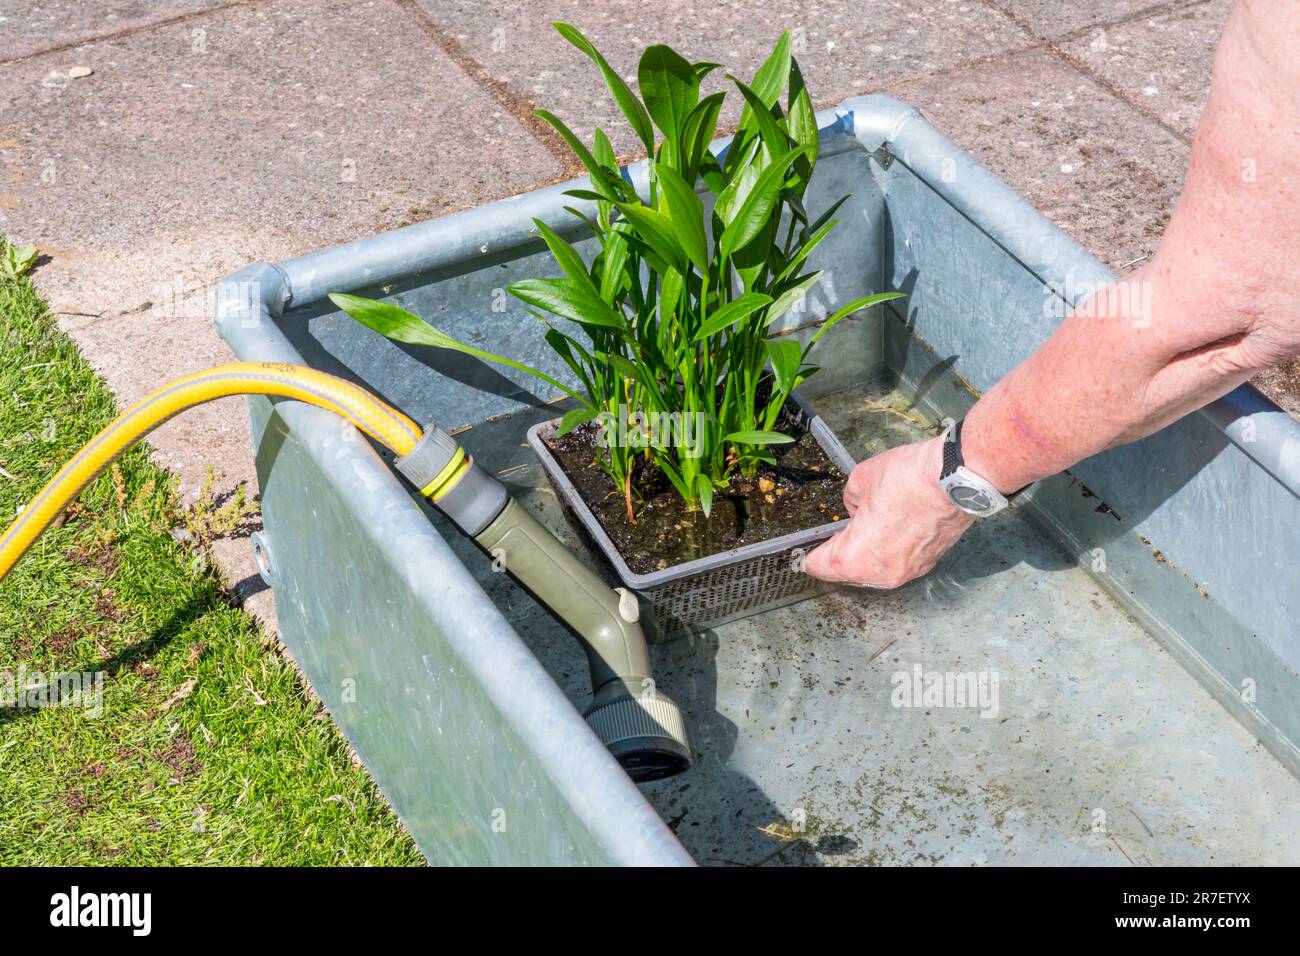 Woman planting an arrowhead, Sagittaria graminea, aquatic plant in garden water feature that she is constructing from a galvanised metal water trough. Stock Photo